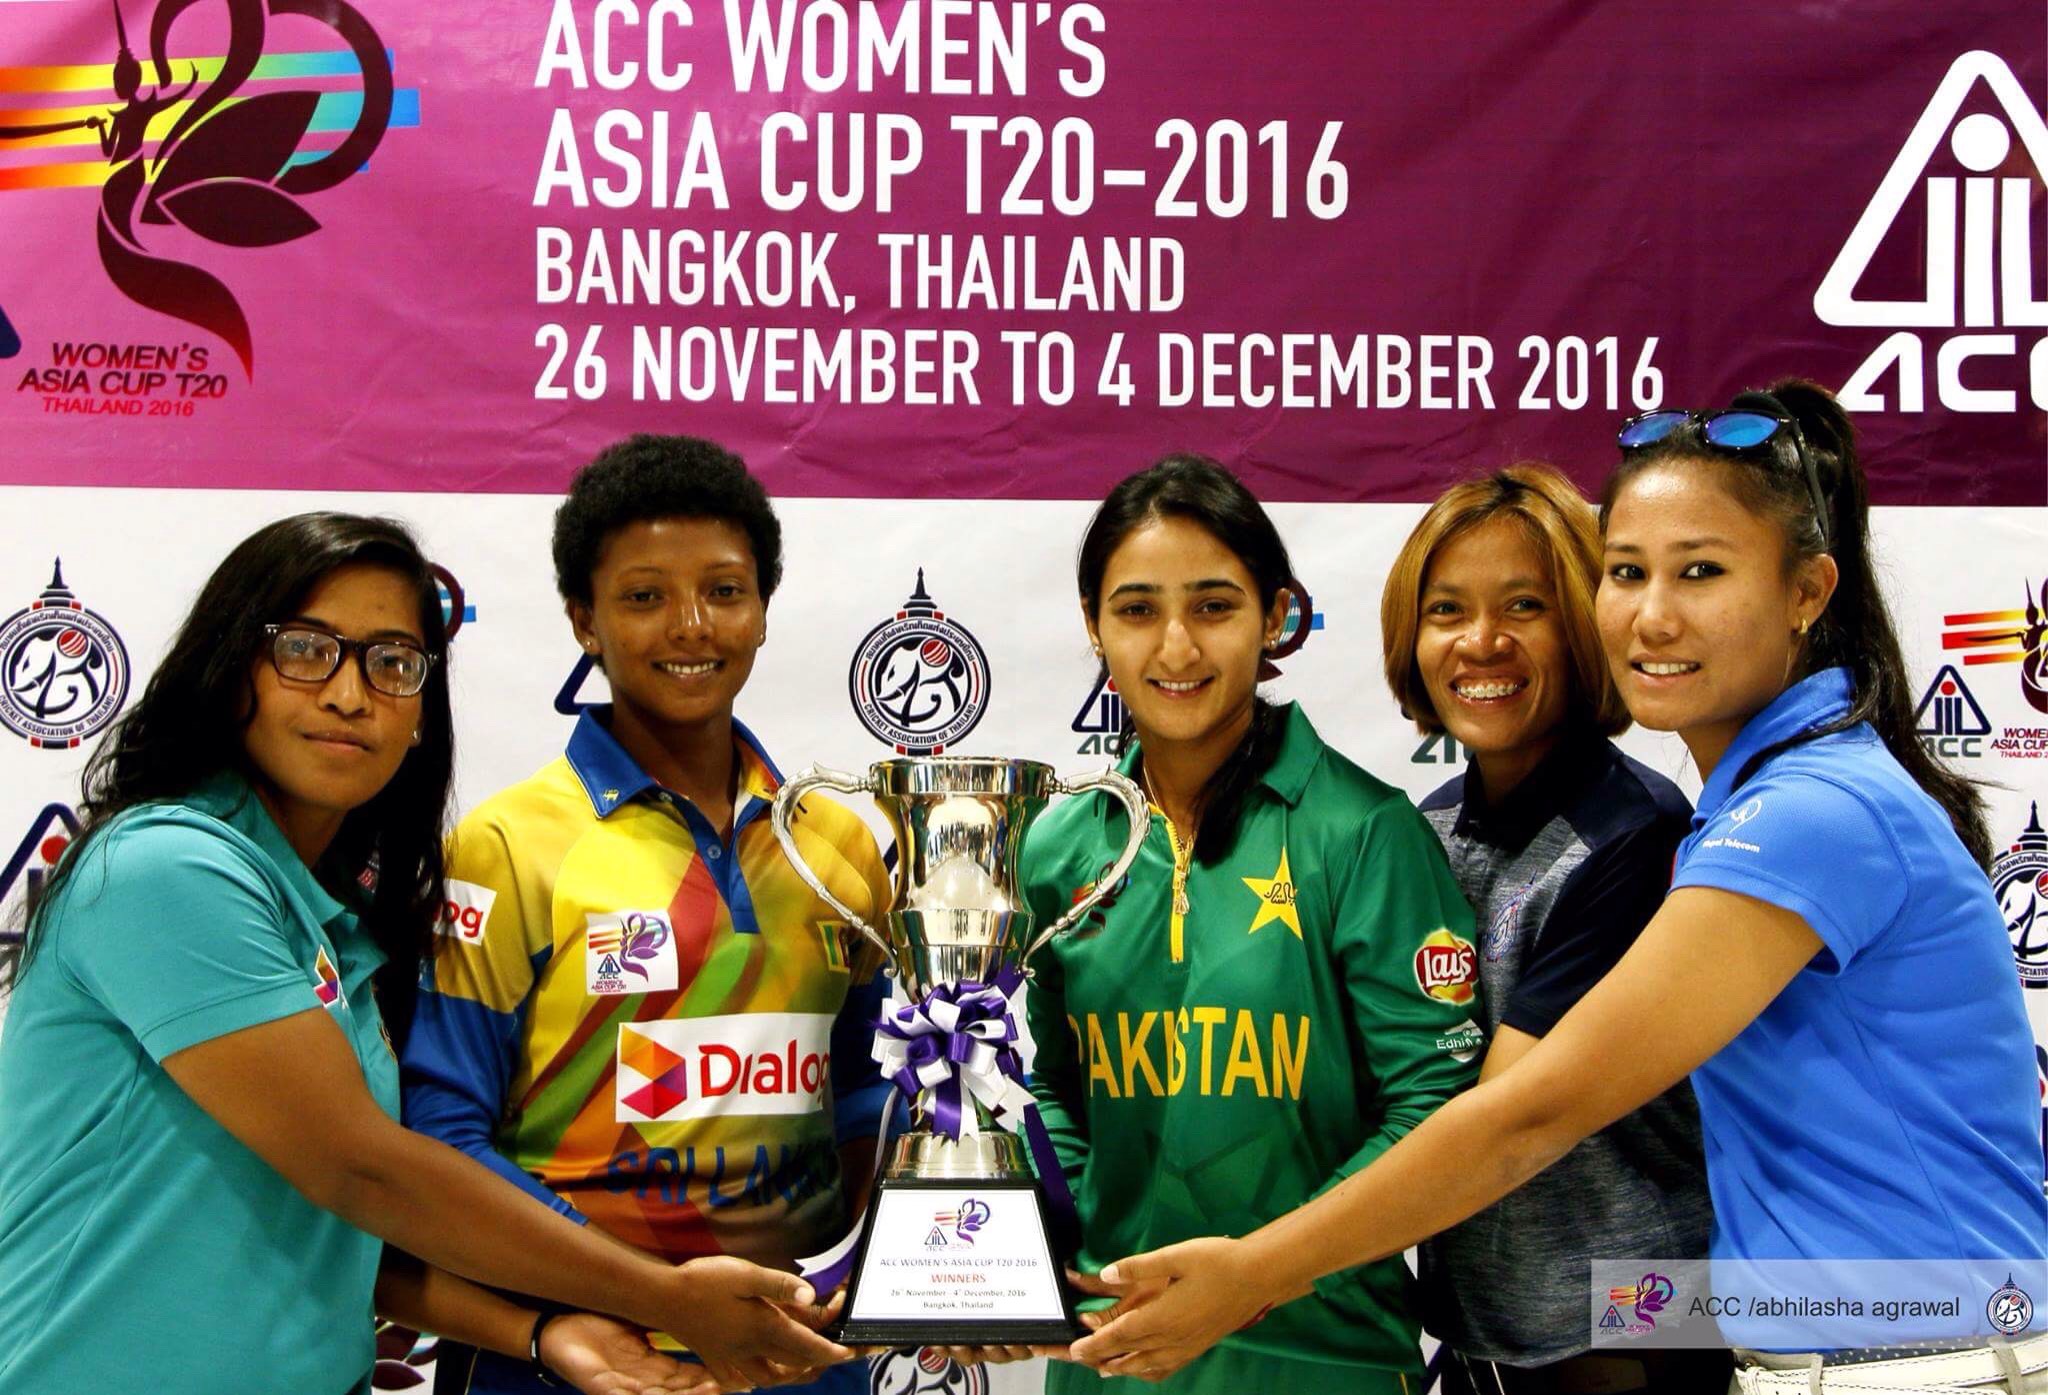 WOMEN’S ASIA CUP COMES TO THAILAND Official website of Cricket